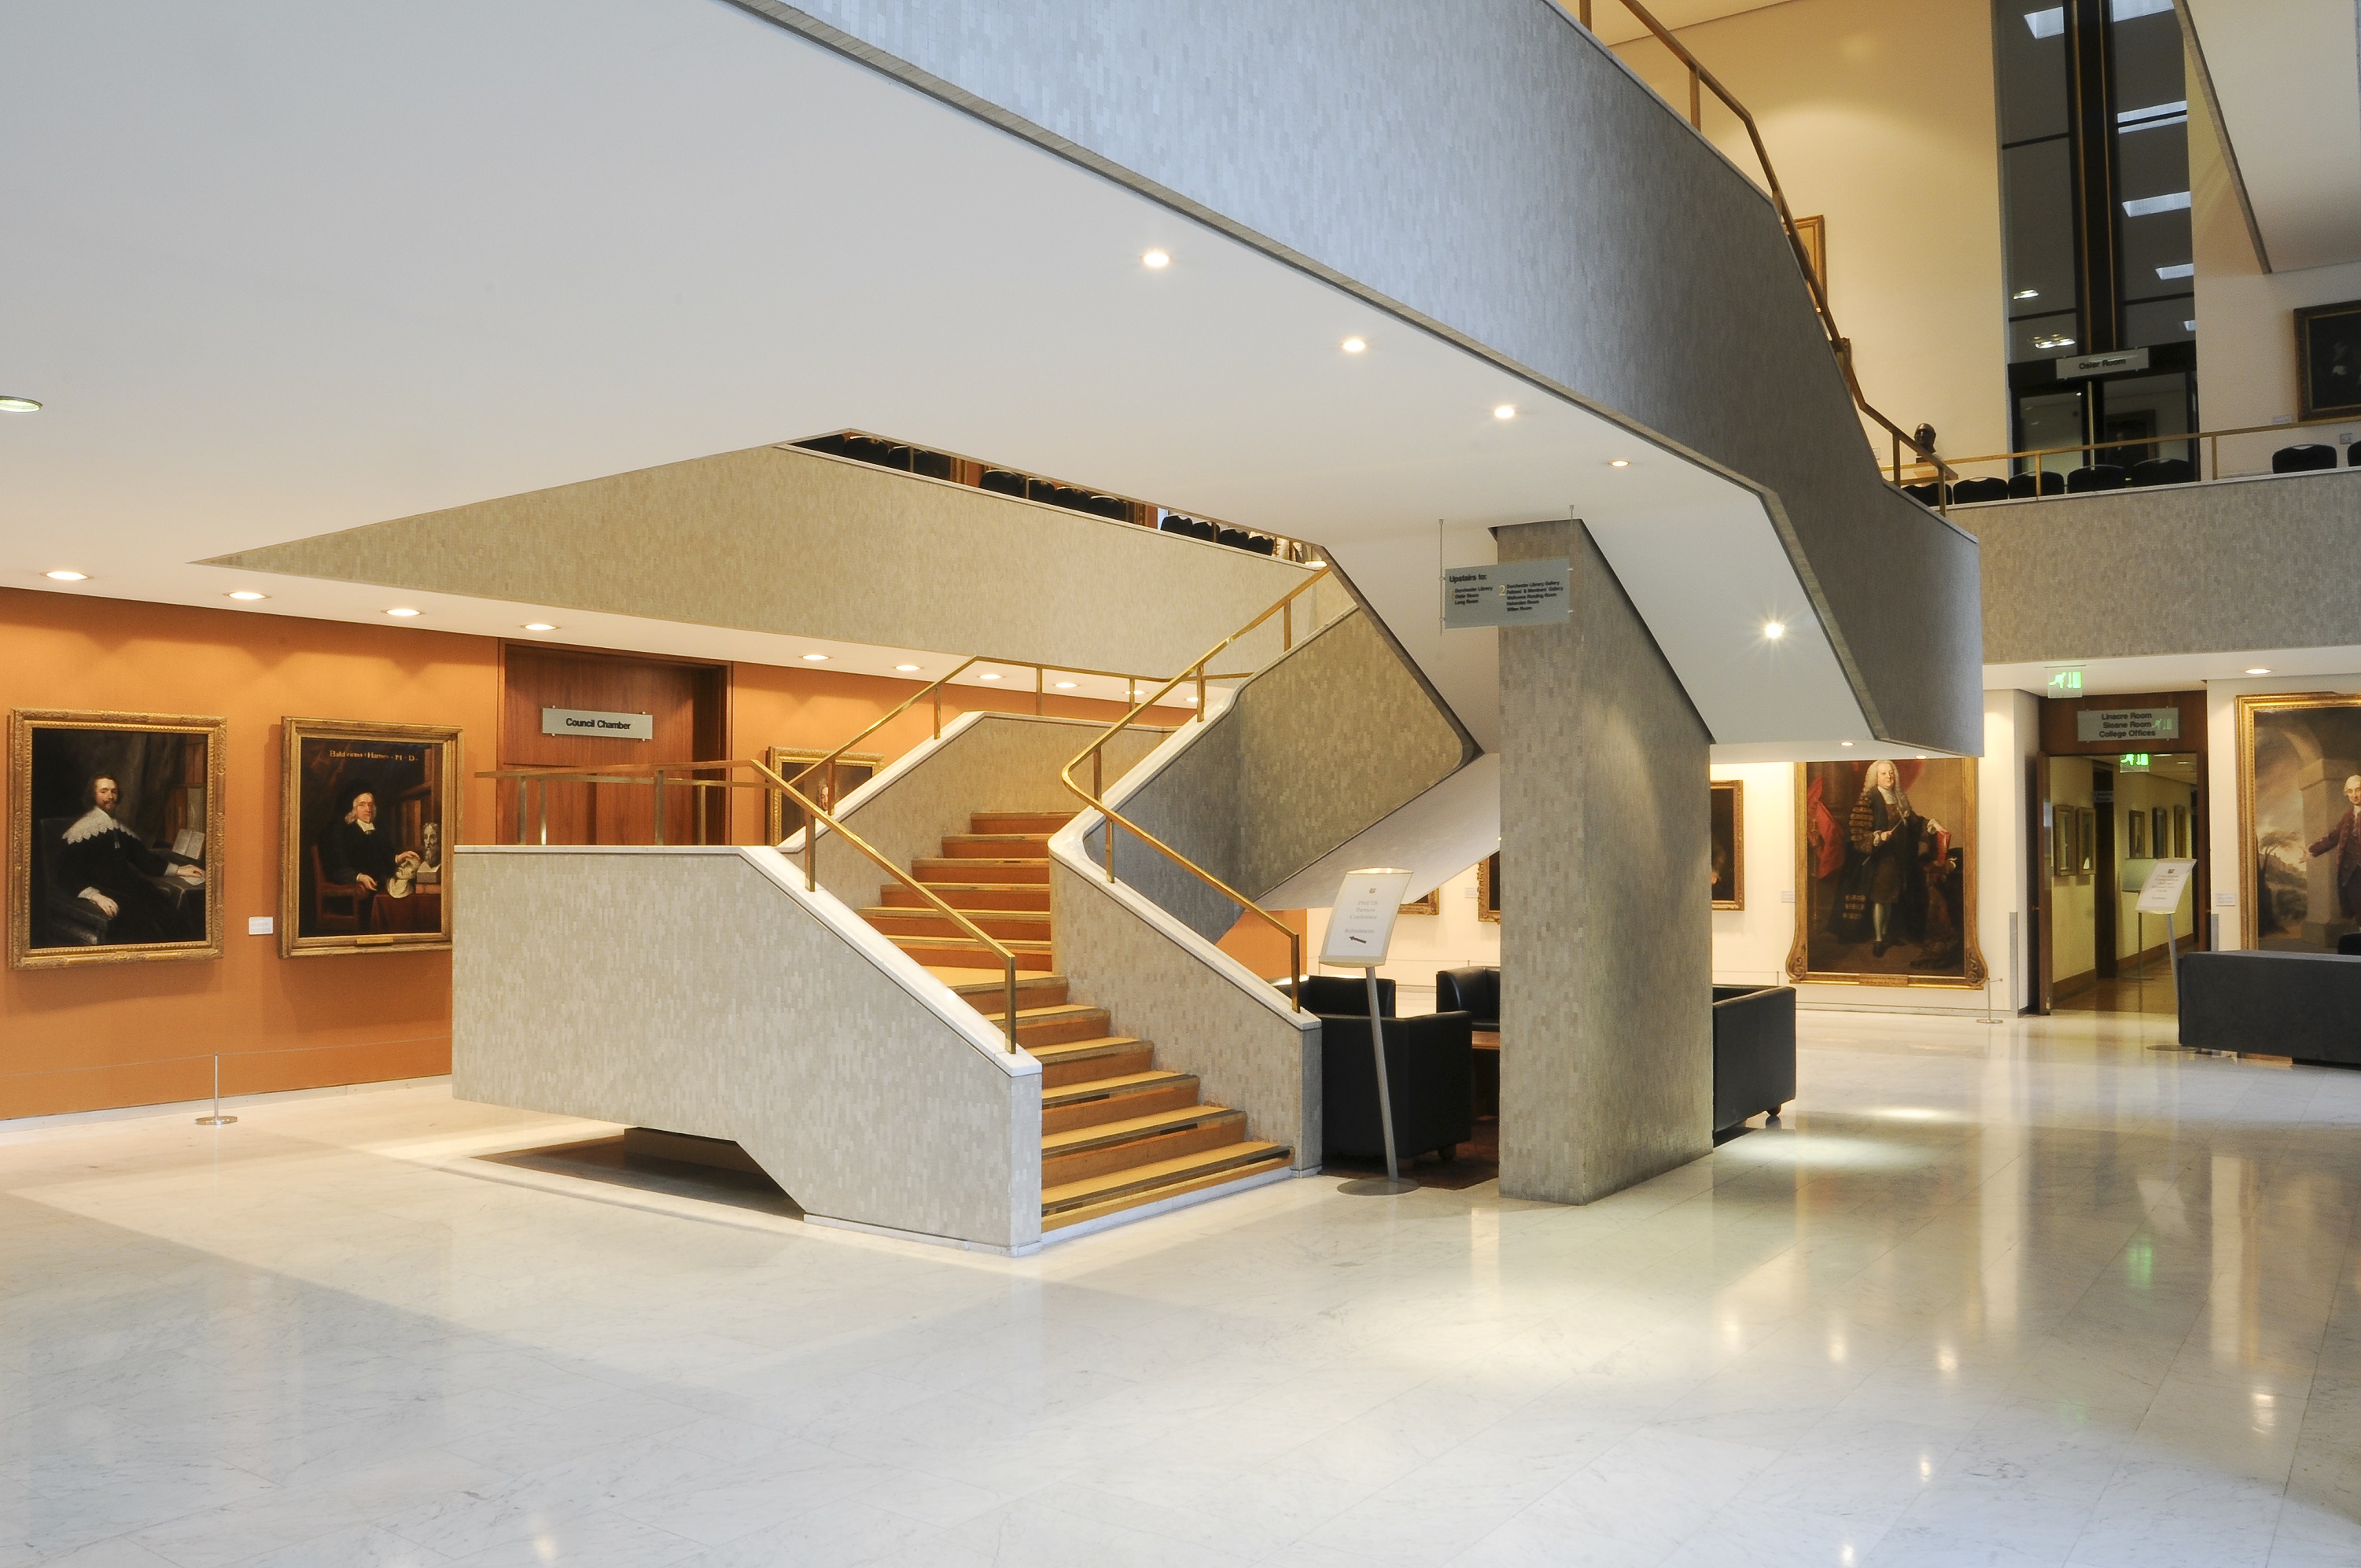 Central stair case in the Lasdun Hall